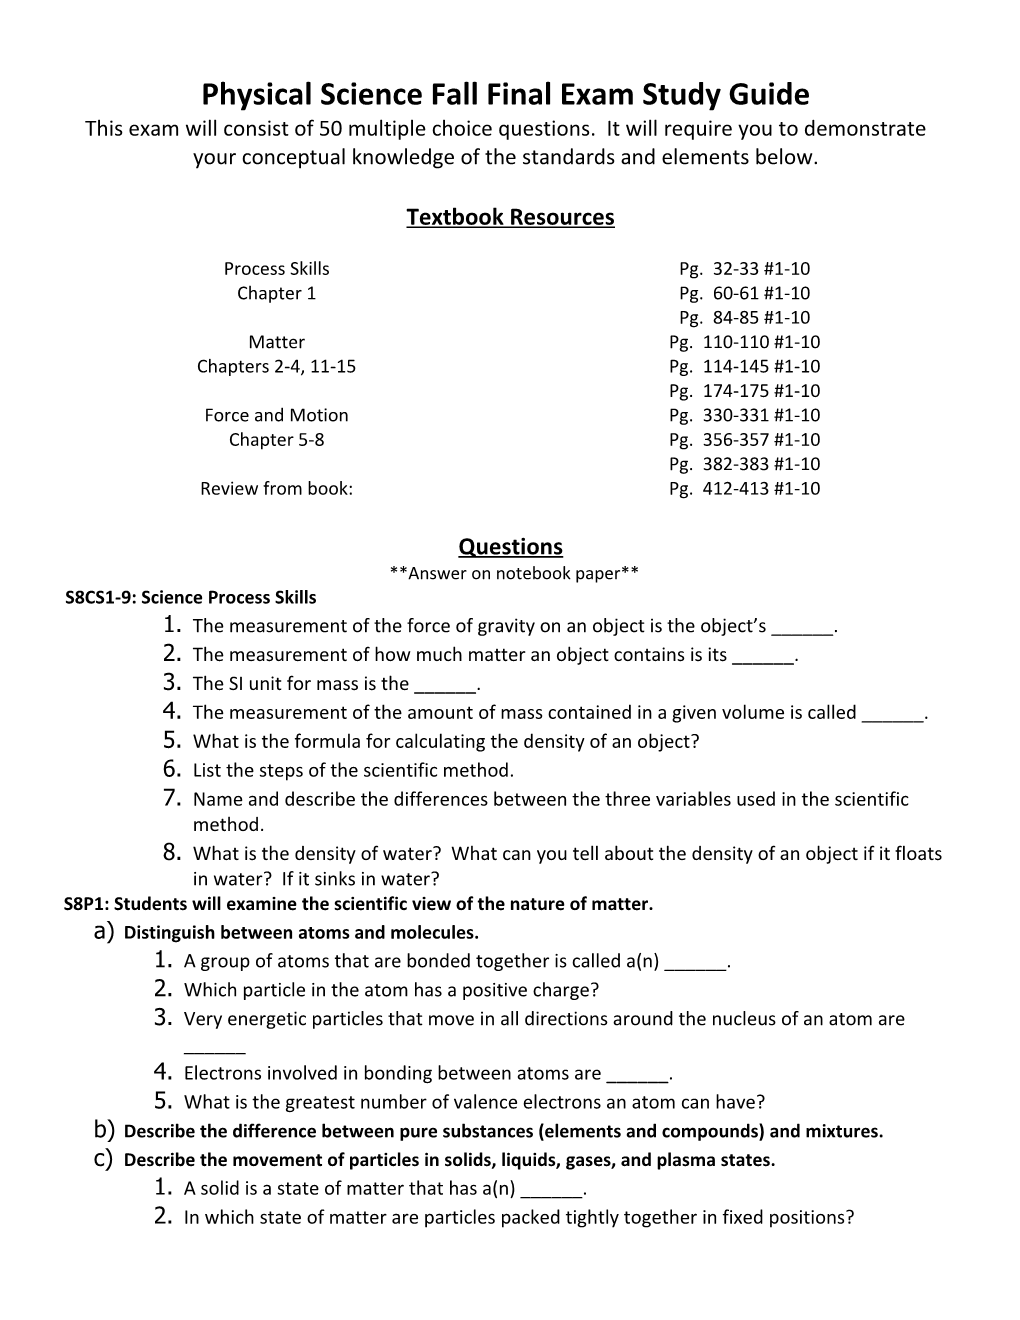 Physical Science Final Exam Study Guide